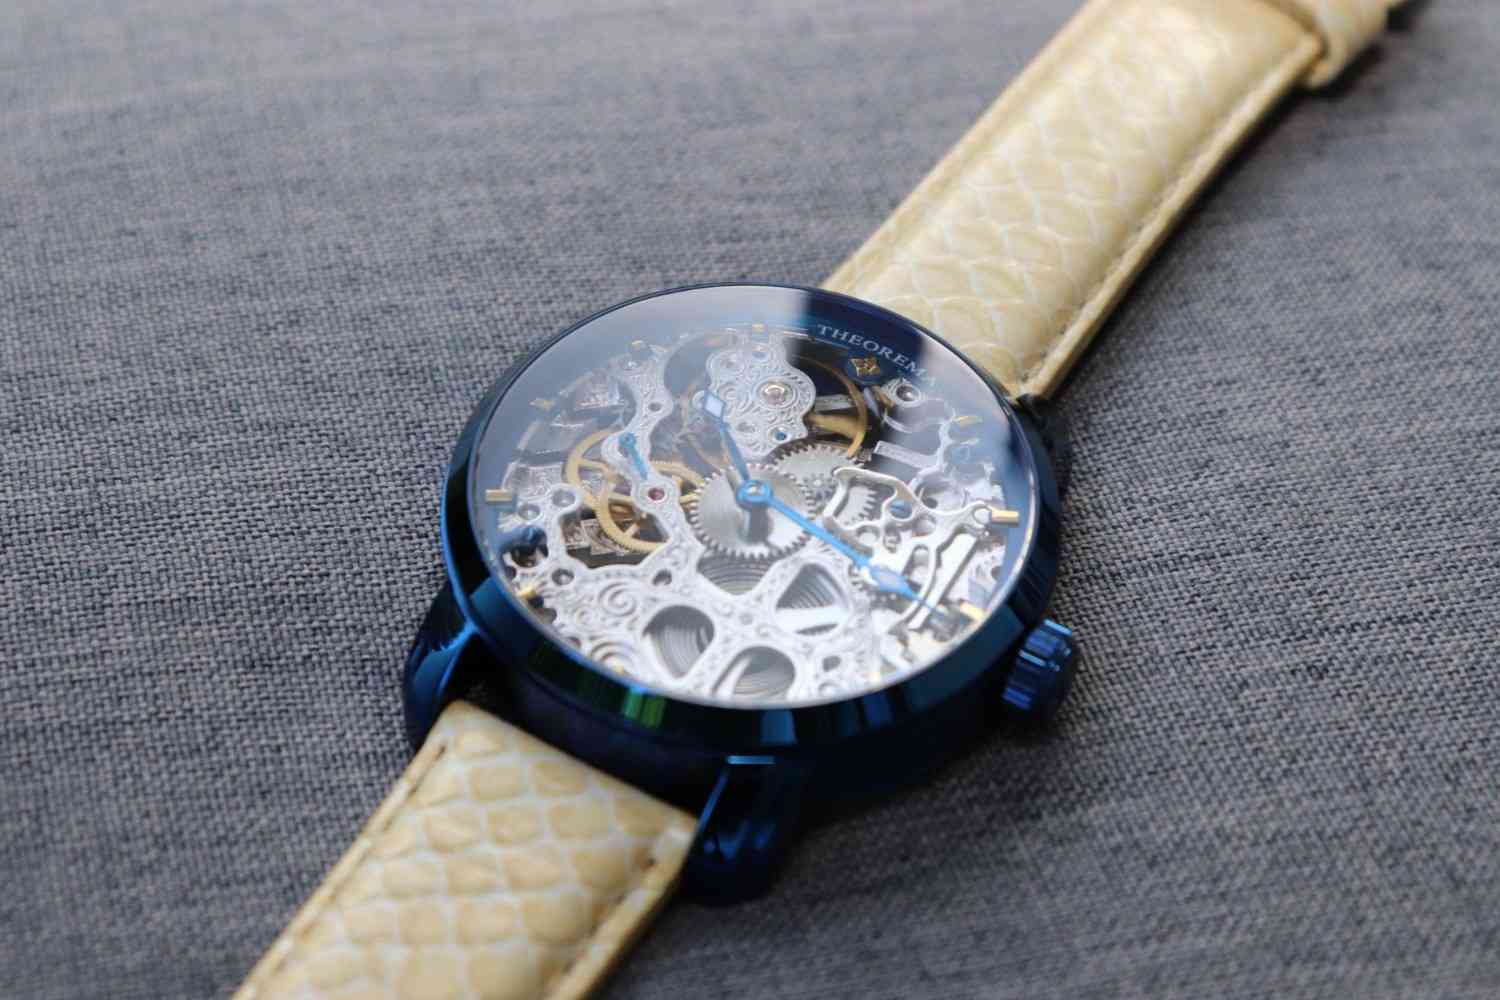 Made in Germany Venezia Theorema GM-118-5 skeleton dial watch for men with leather band and thin blue hands